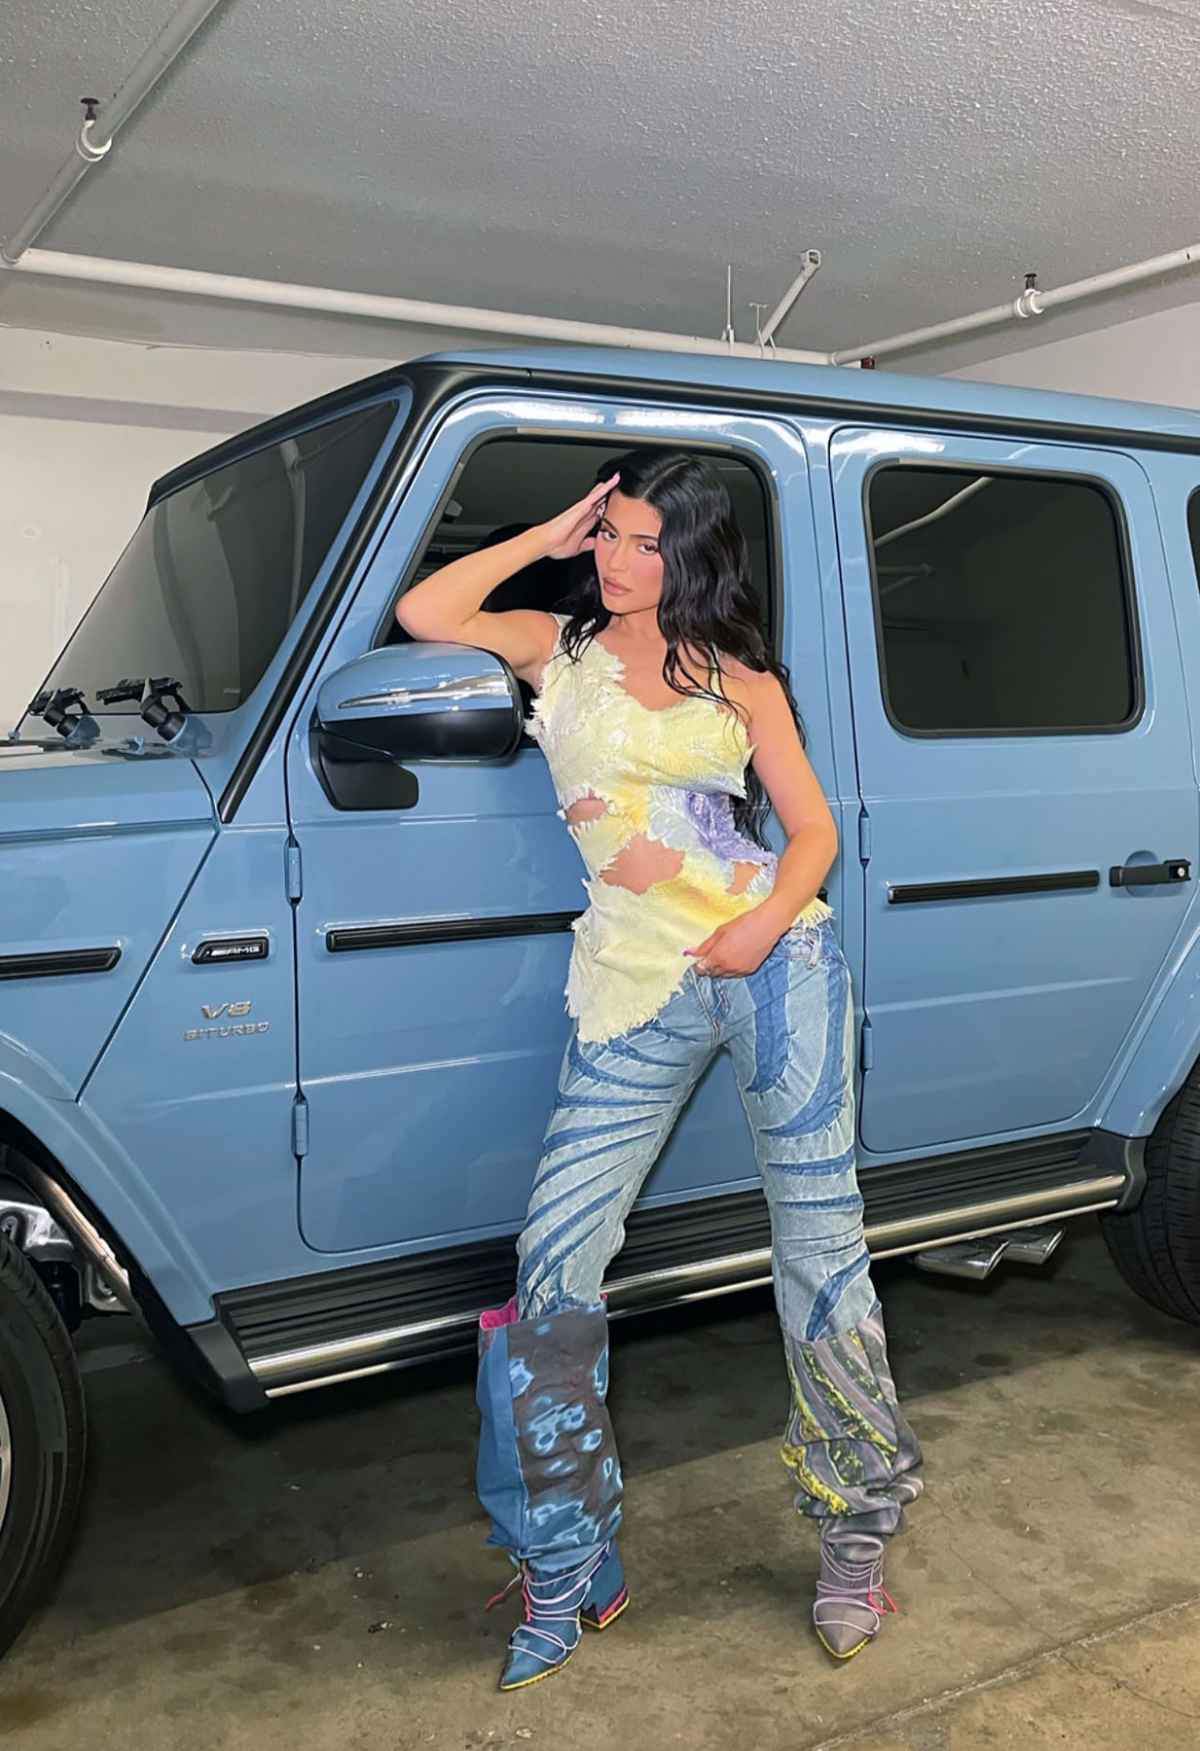 Kylie Jenner Wears Pink Accessories to Match the Interior of Her Car